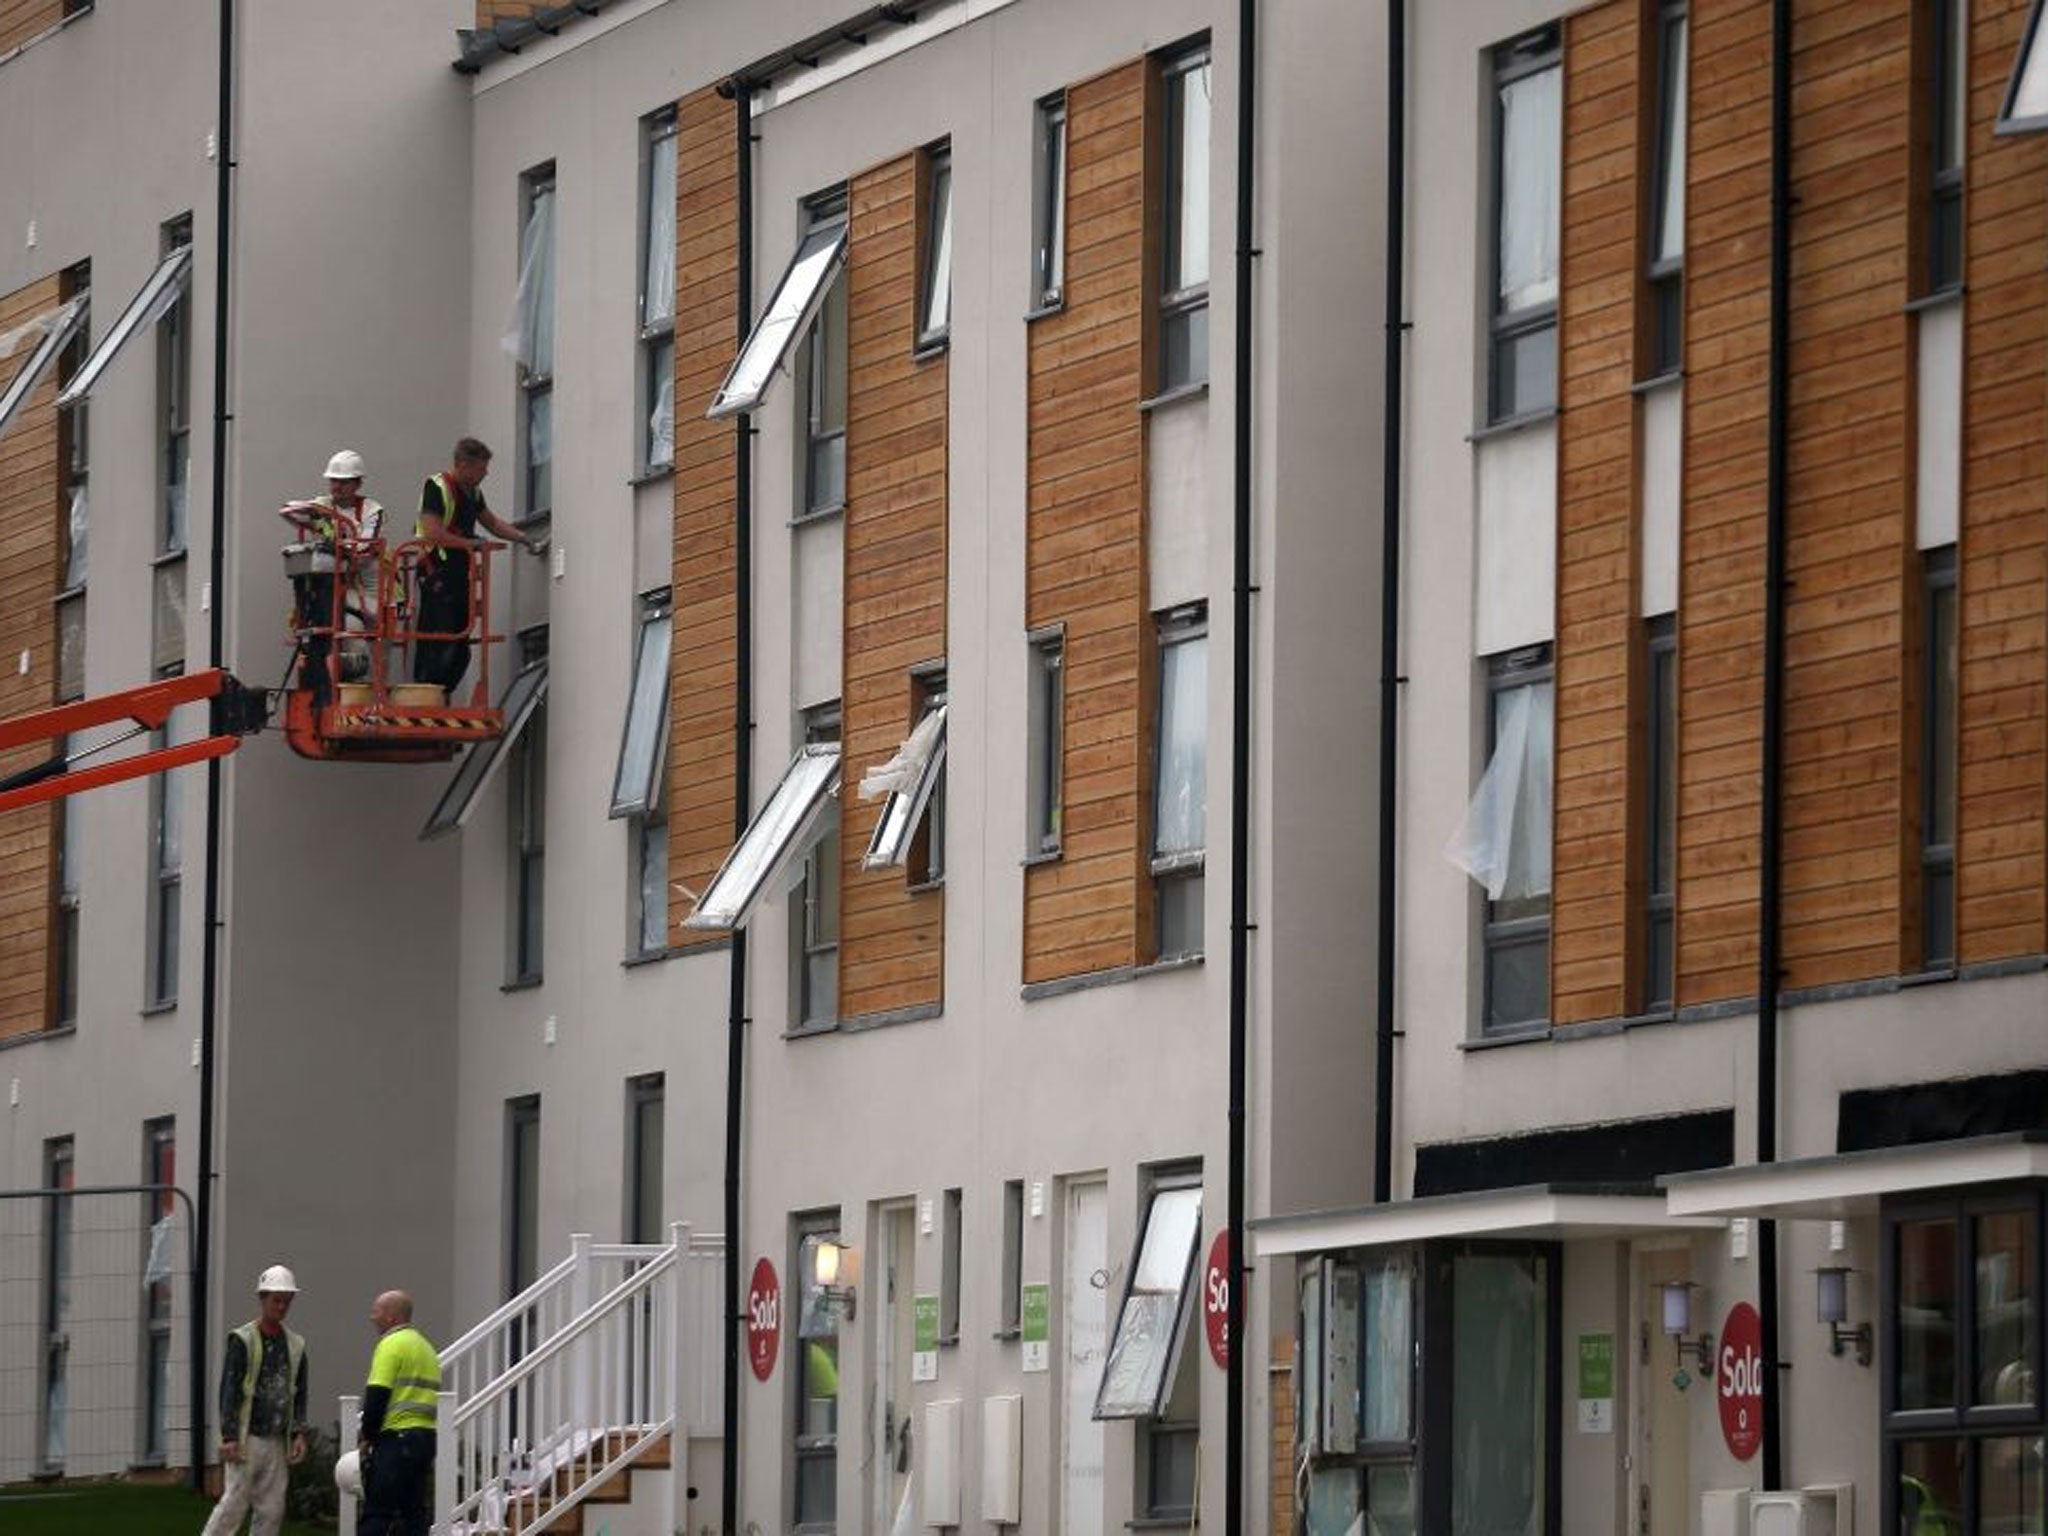 Construction workers building new homes at a housing development in Filton, Bristol